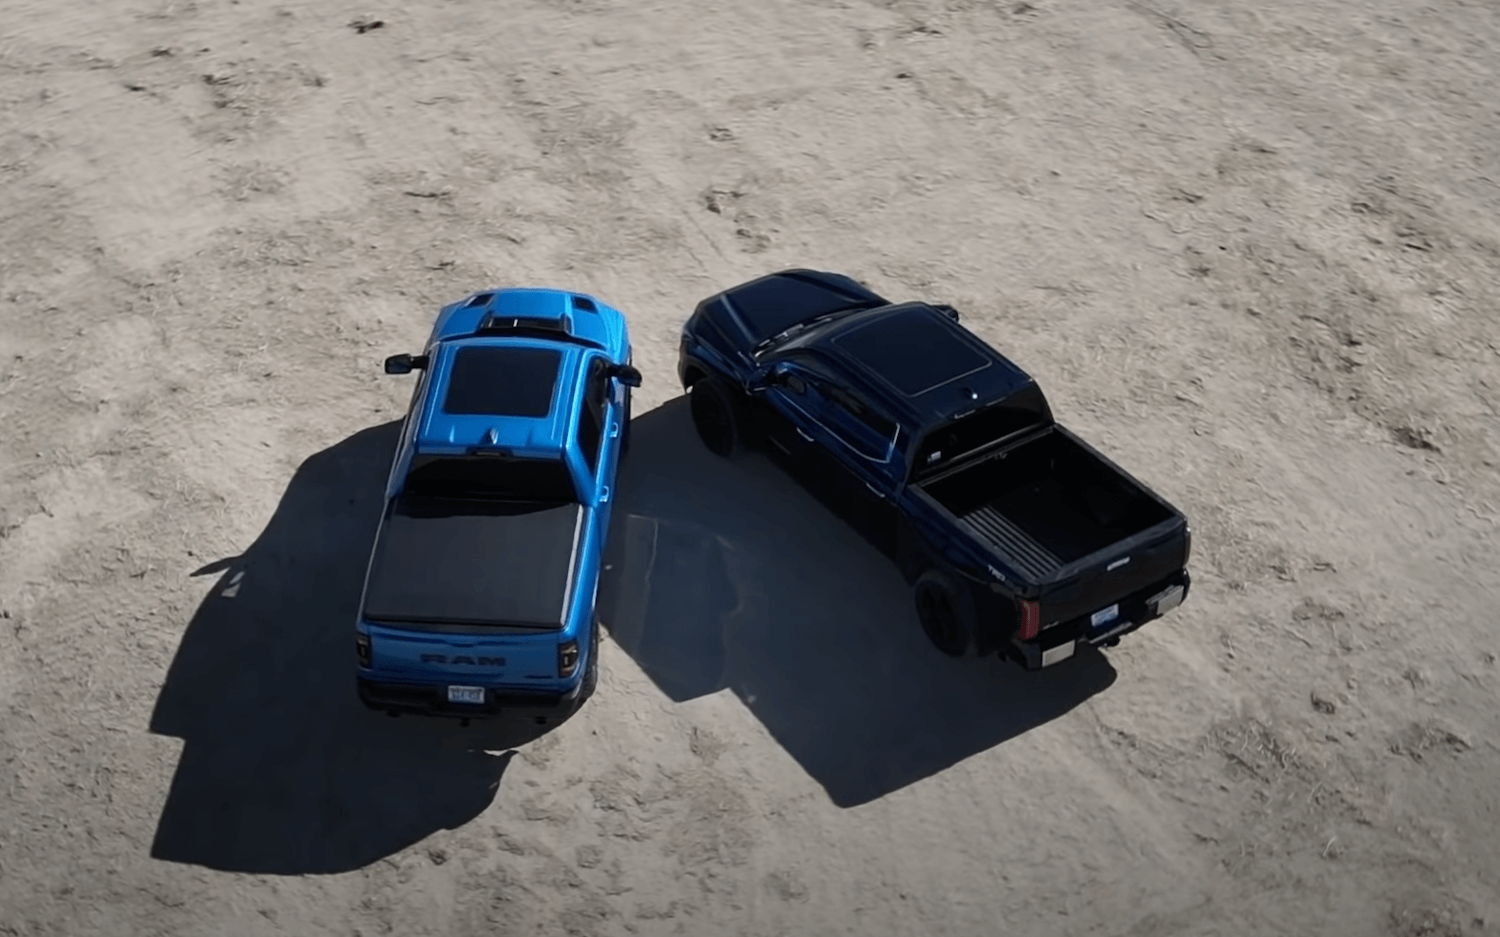 Bird's eye view of a Ram 1500 and Toyota Tundra Limited parked side-by-side.